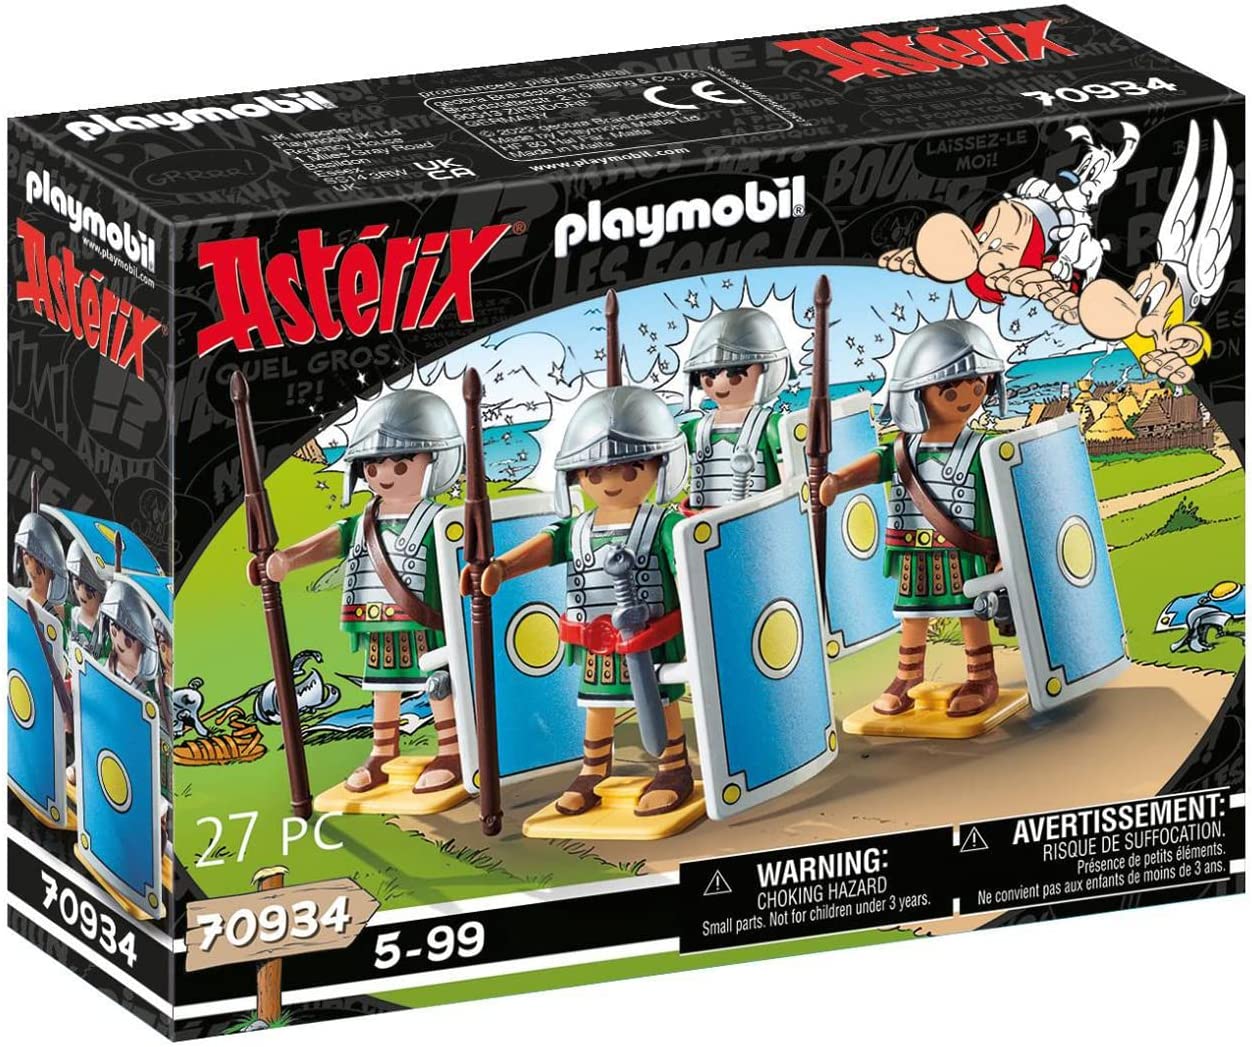 PLAYMOBIL Asterix 70934 Römertrupp Toy for Children from 5 Years